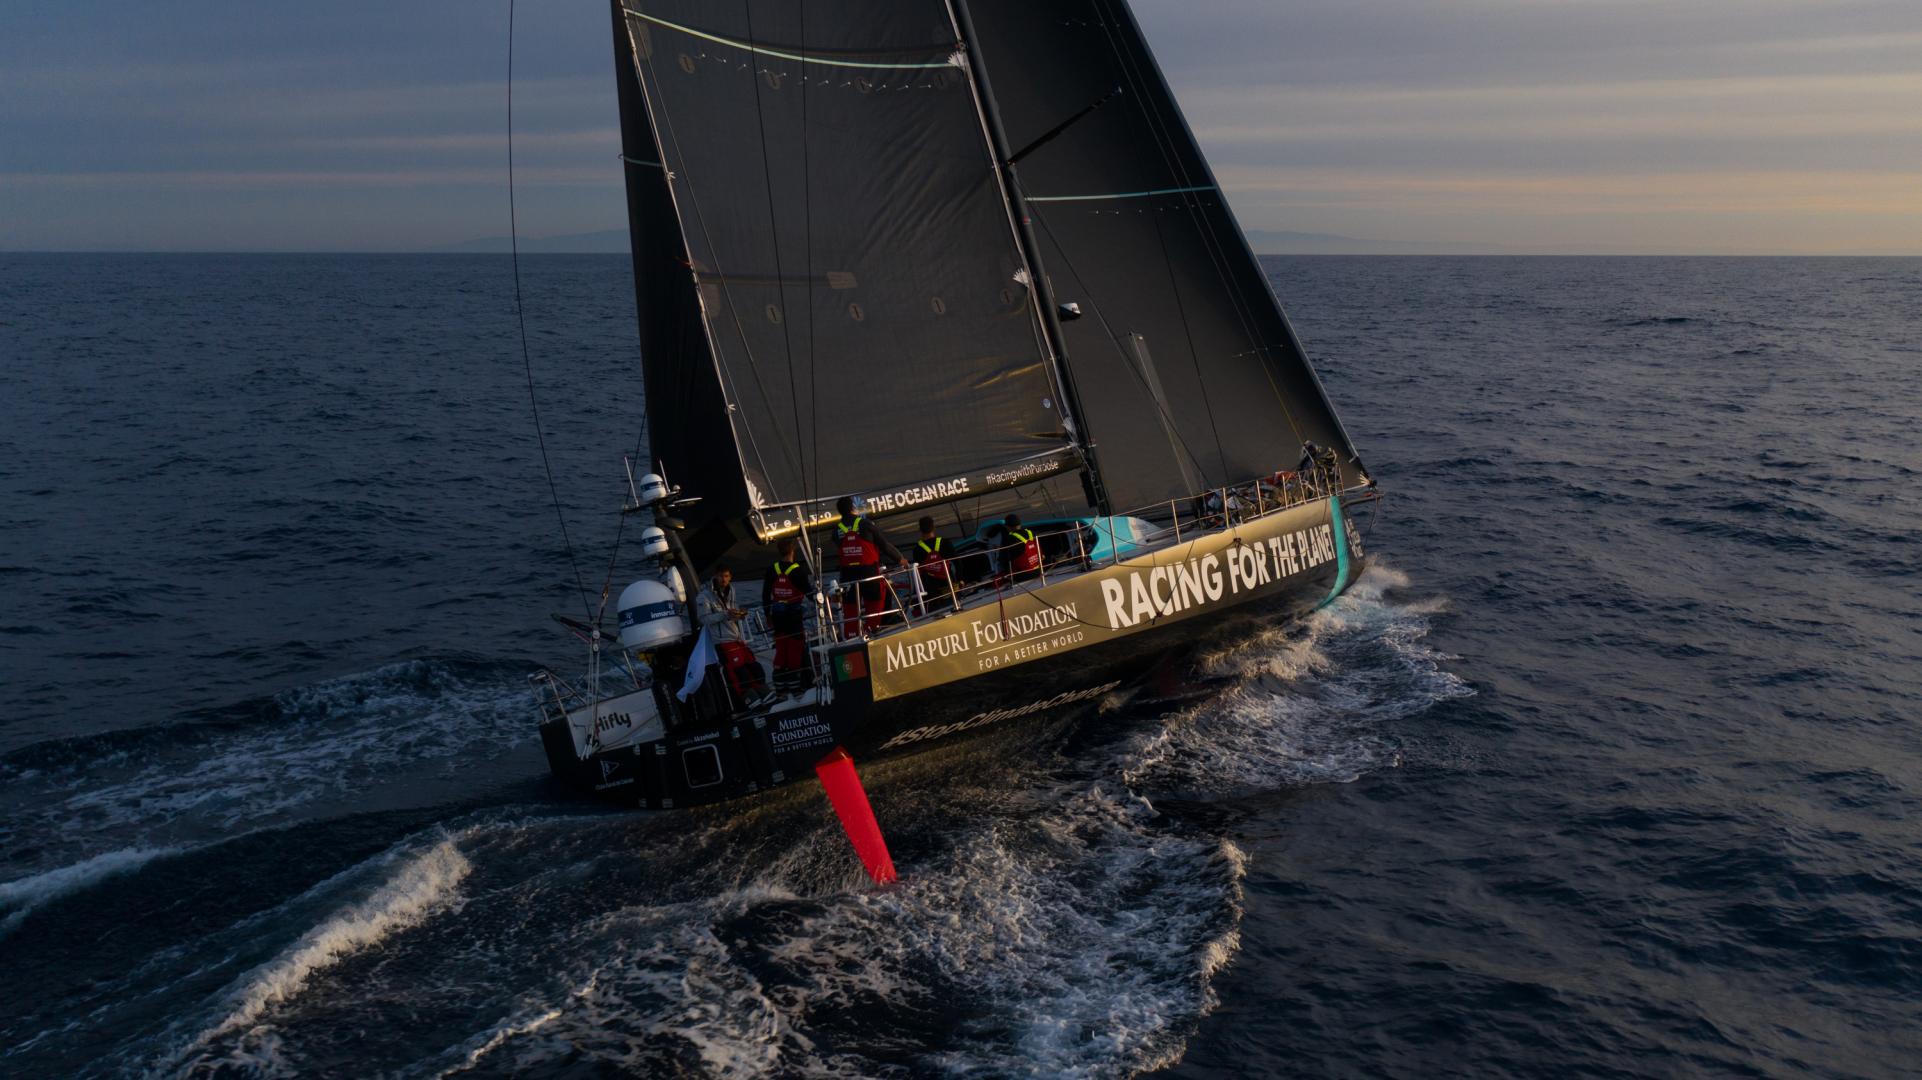 The Ocean Race Europe. Leg 2 from Cascais, Portugal, to Alicante, Spain. On Board Mirpuri Foundation Racing Team